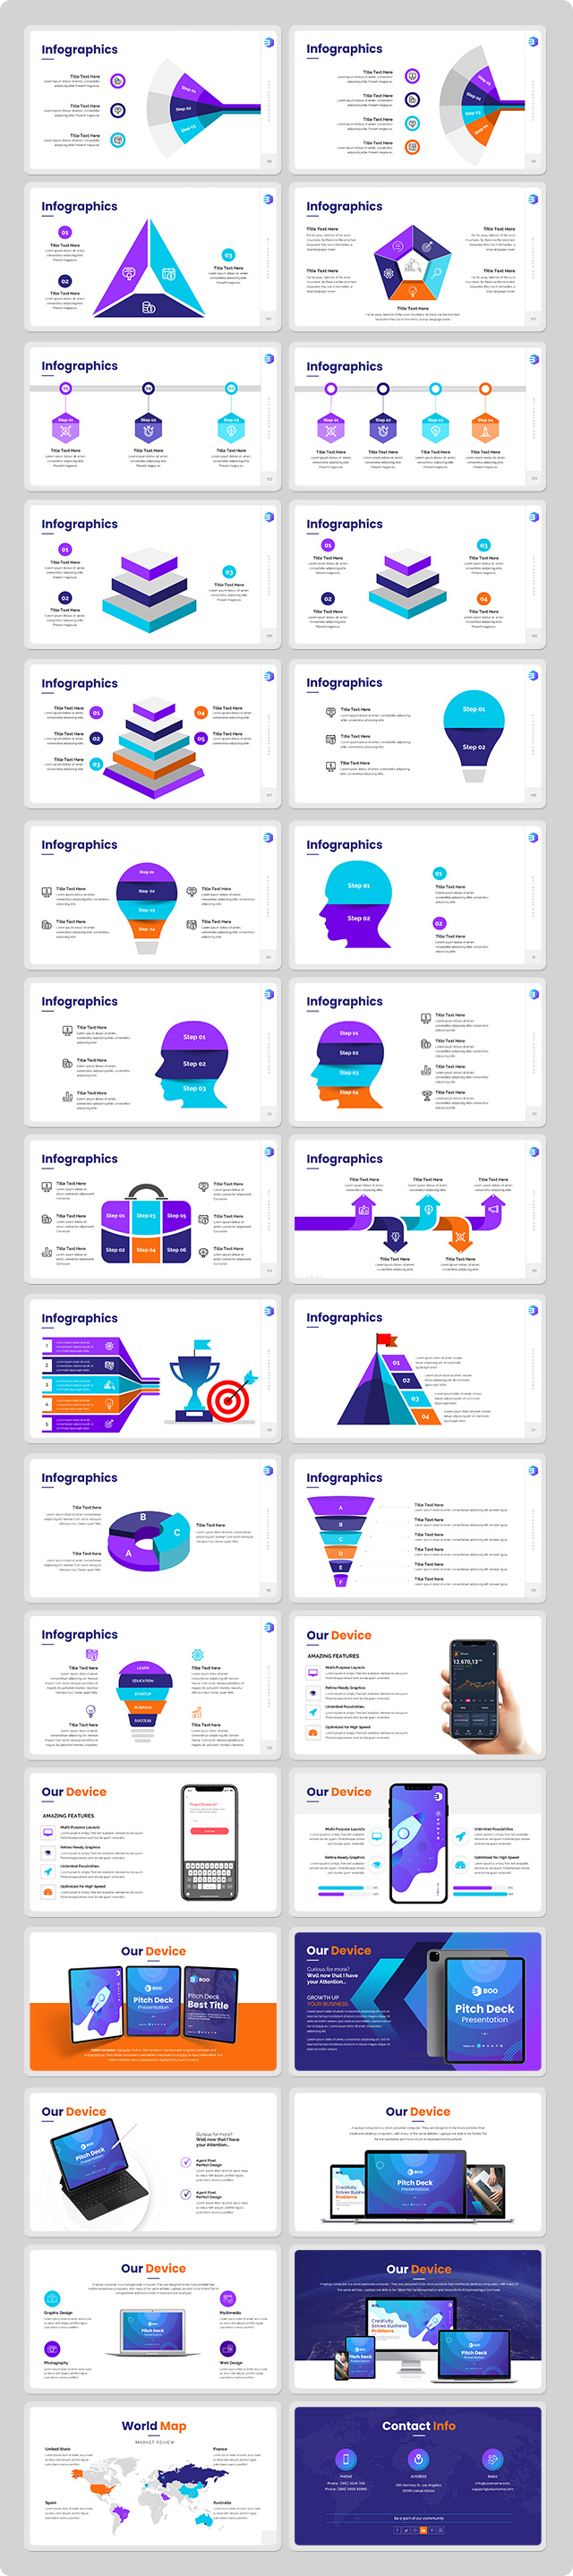 BOO - Pitch Deck PowerPoint Presentation Template - 5